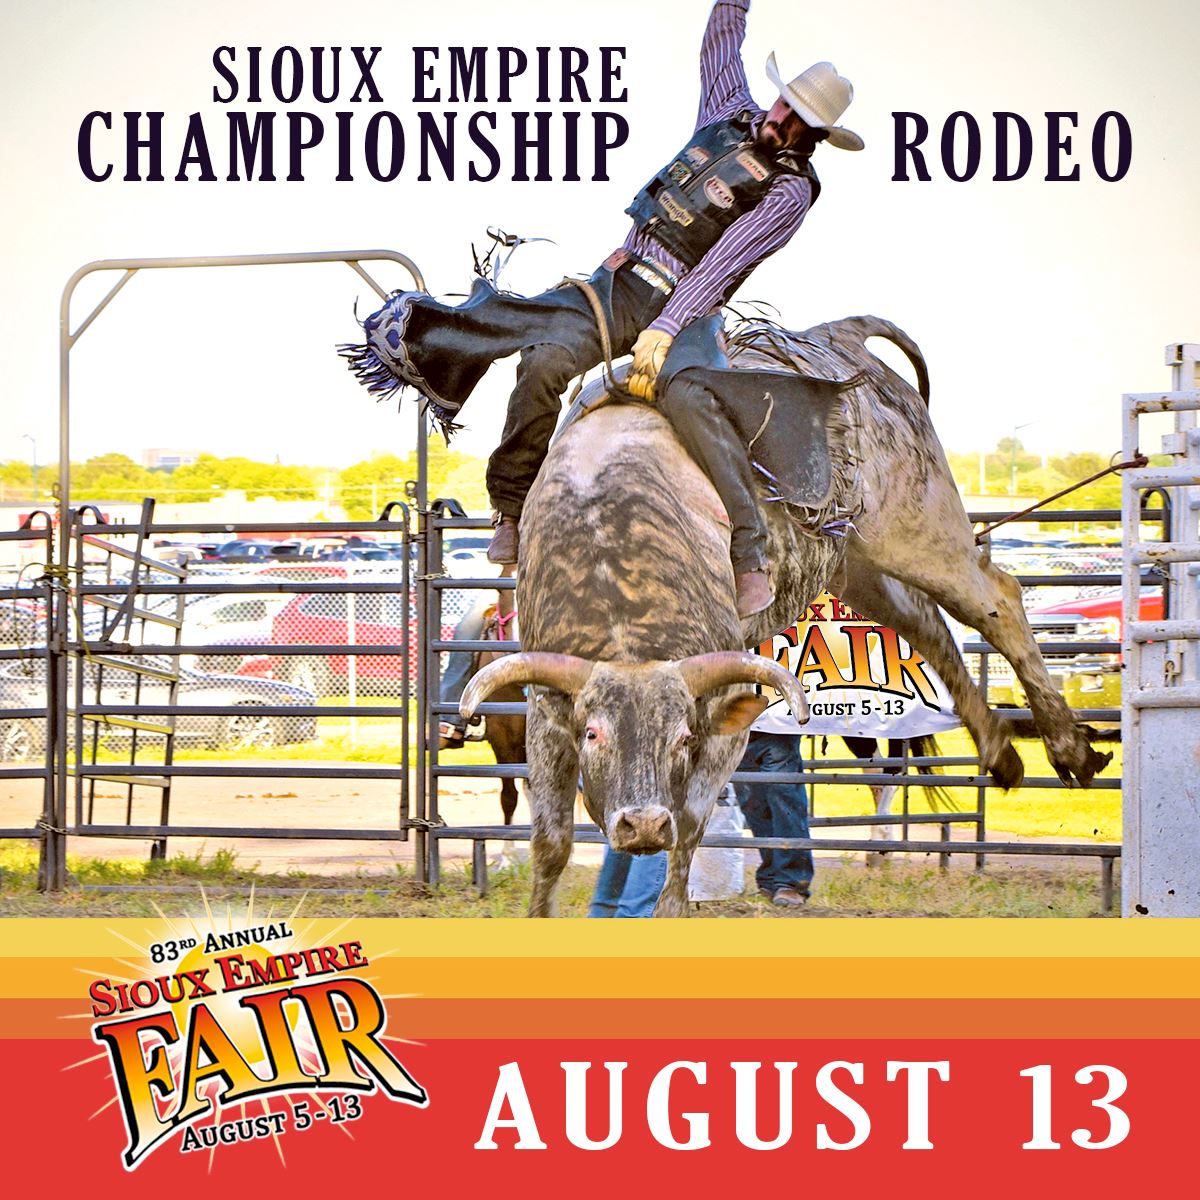 Sioux Empire Championship Rodeo